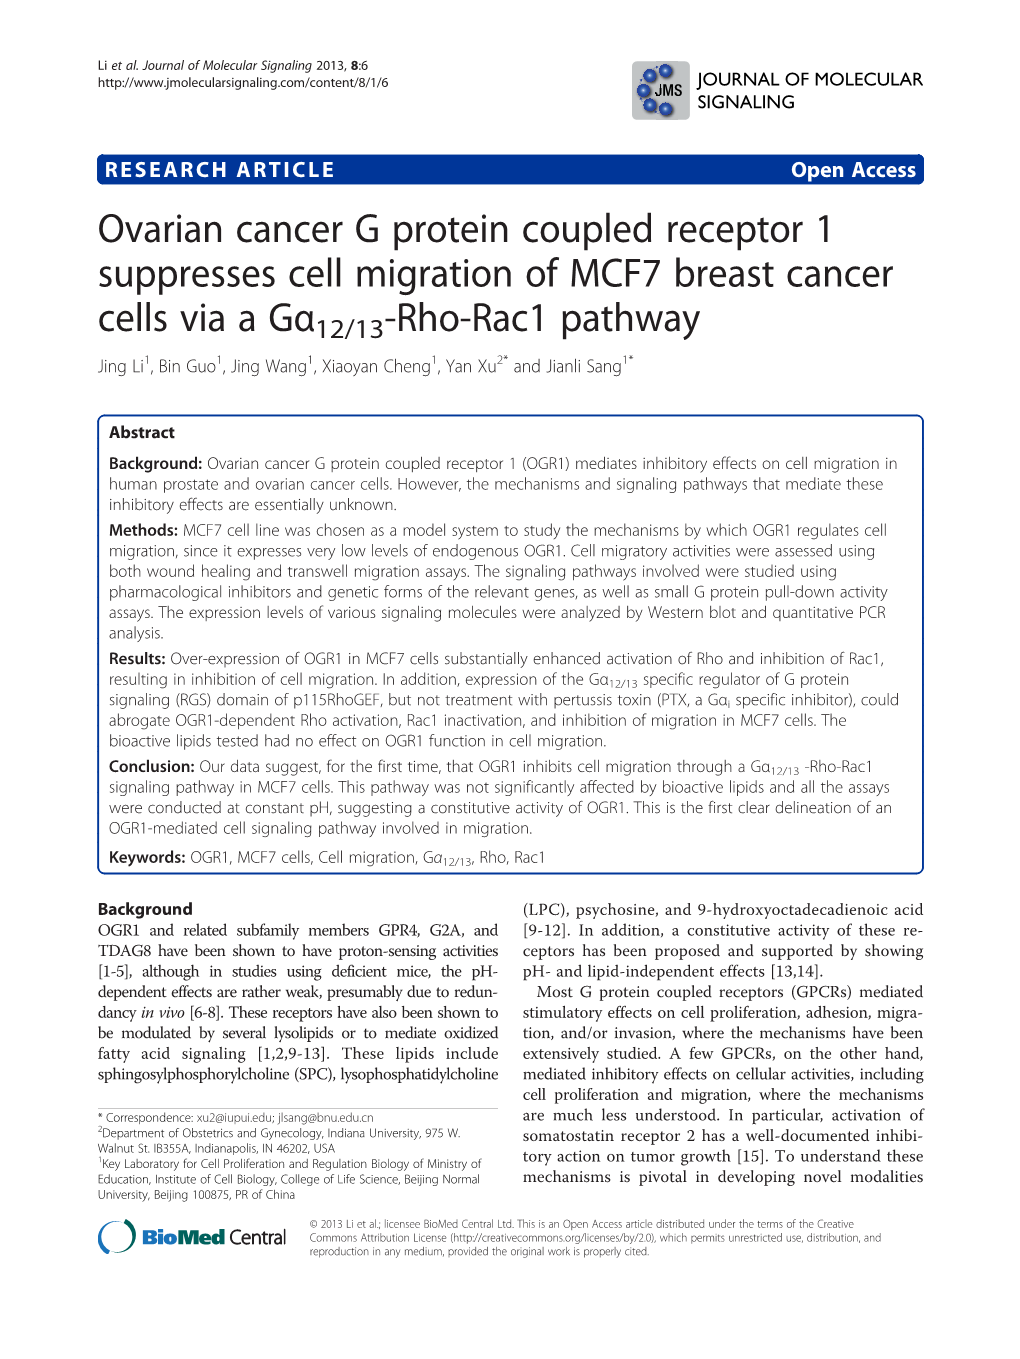 Ovarian Cancer G Protein Coupled Receptor 1 Suppresses Cell